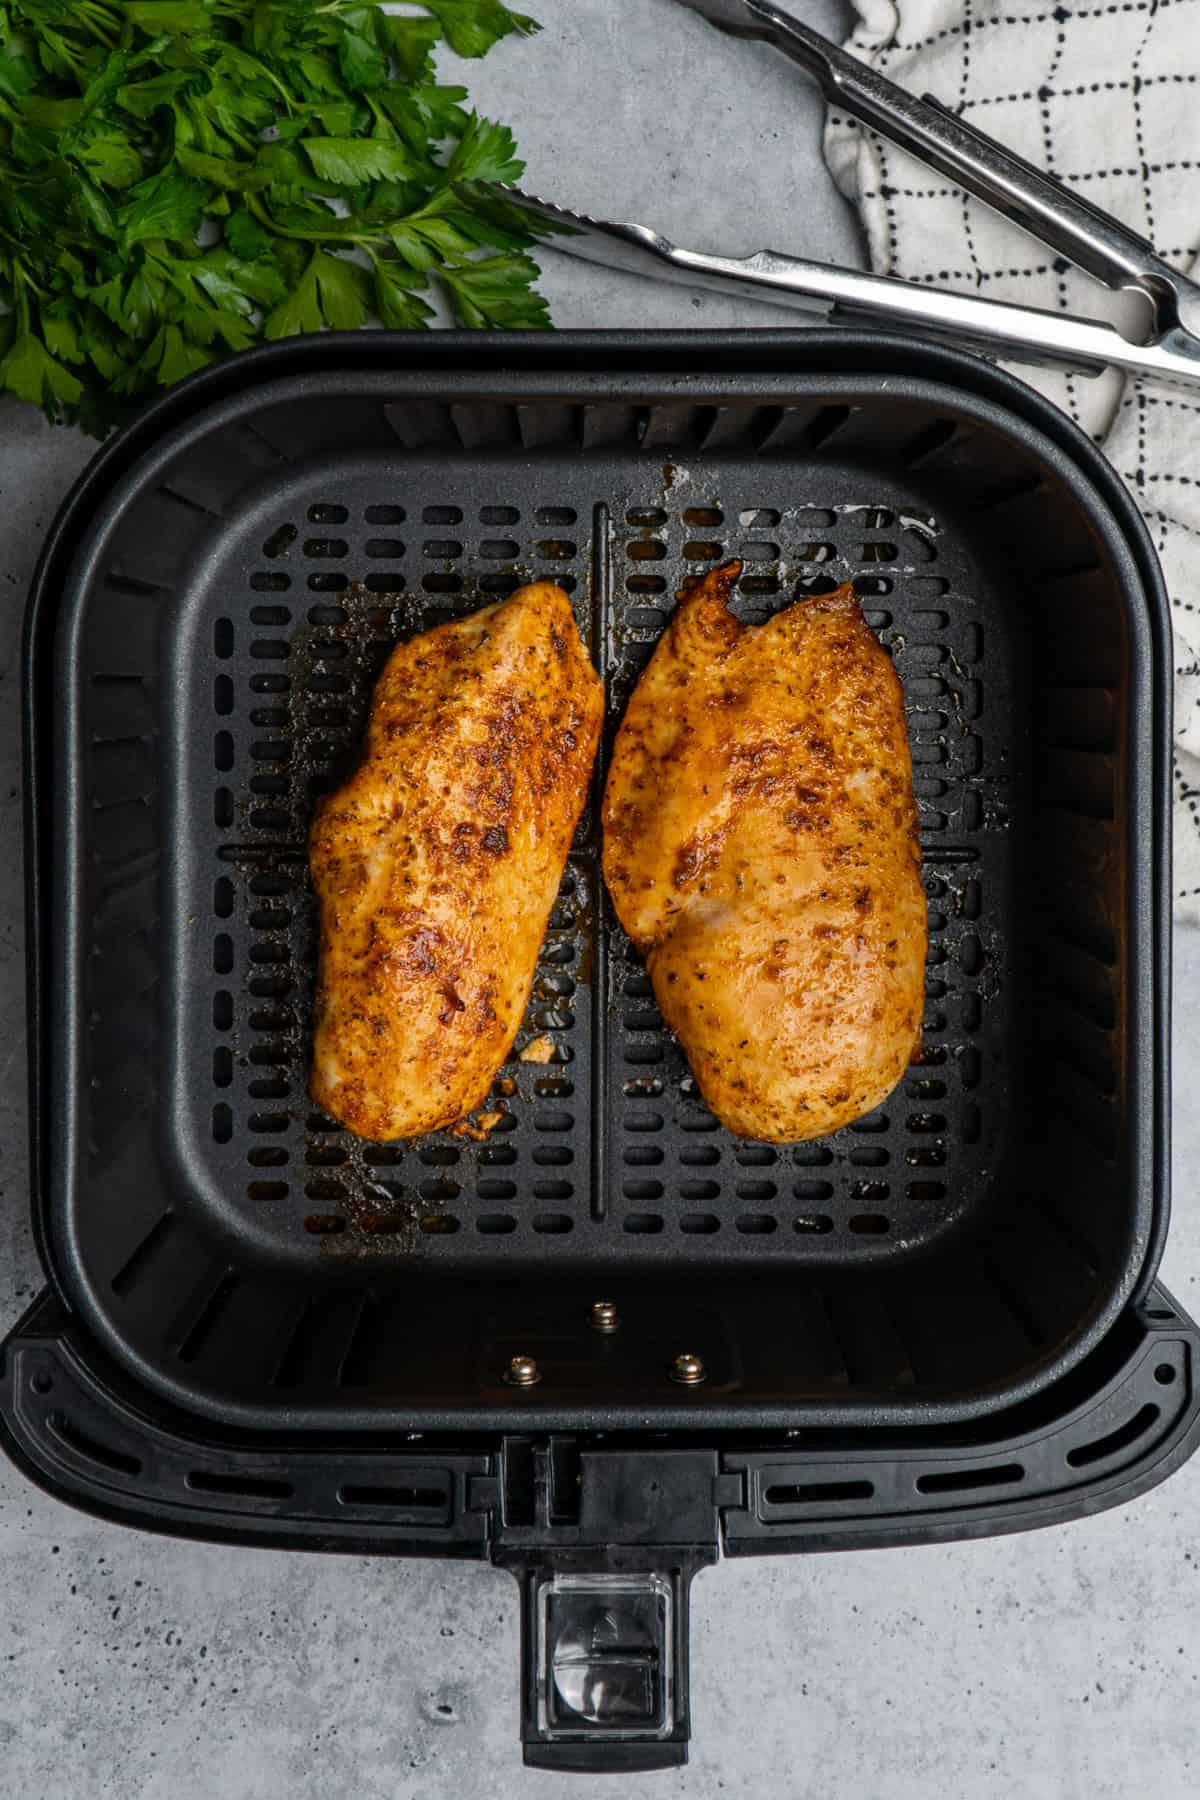 Two cooked chicken breasts in an air fryer basket